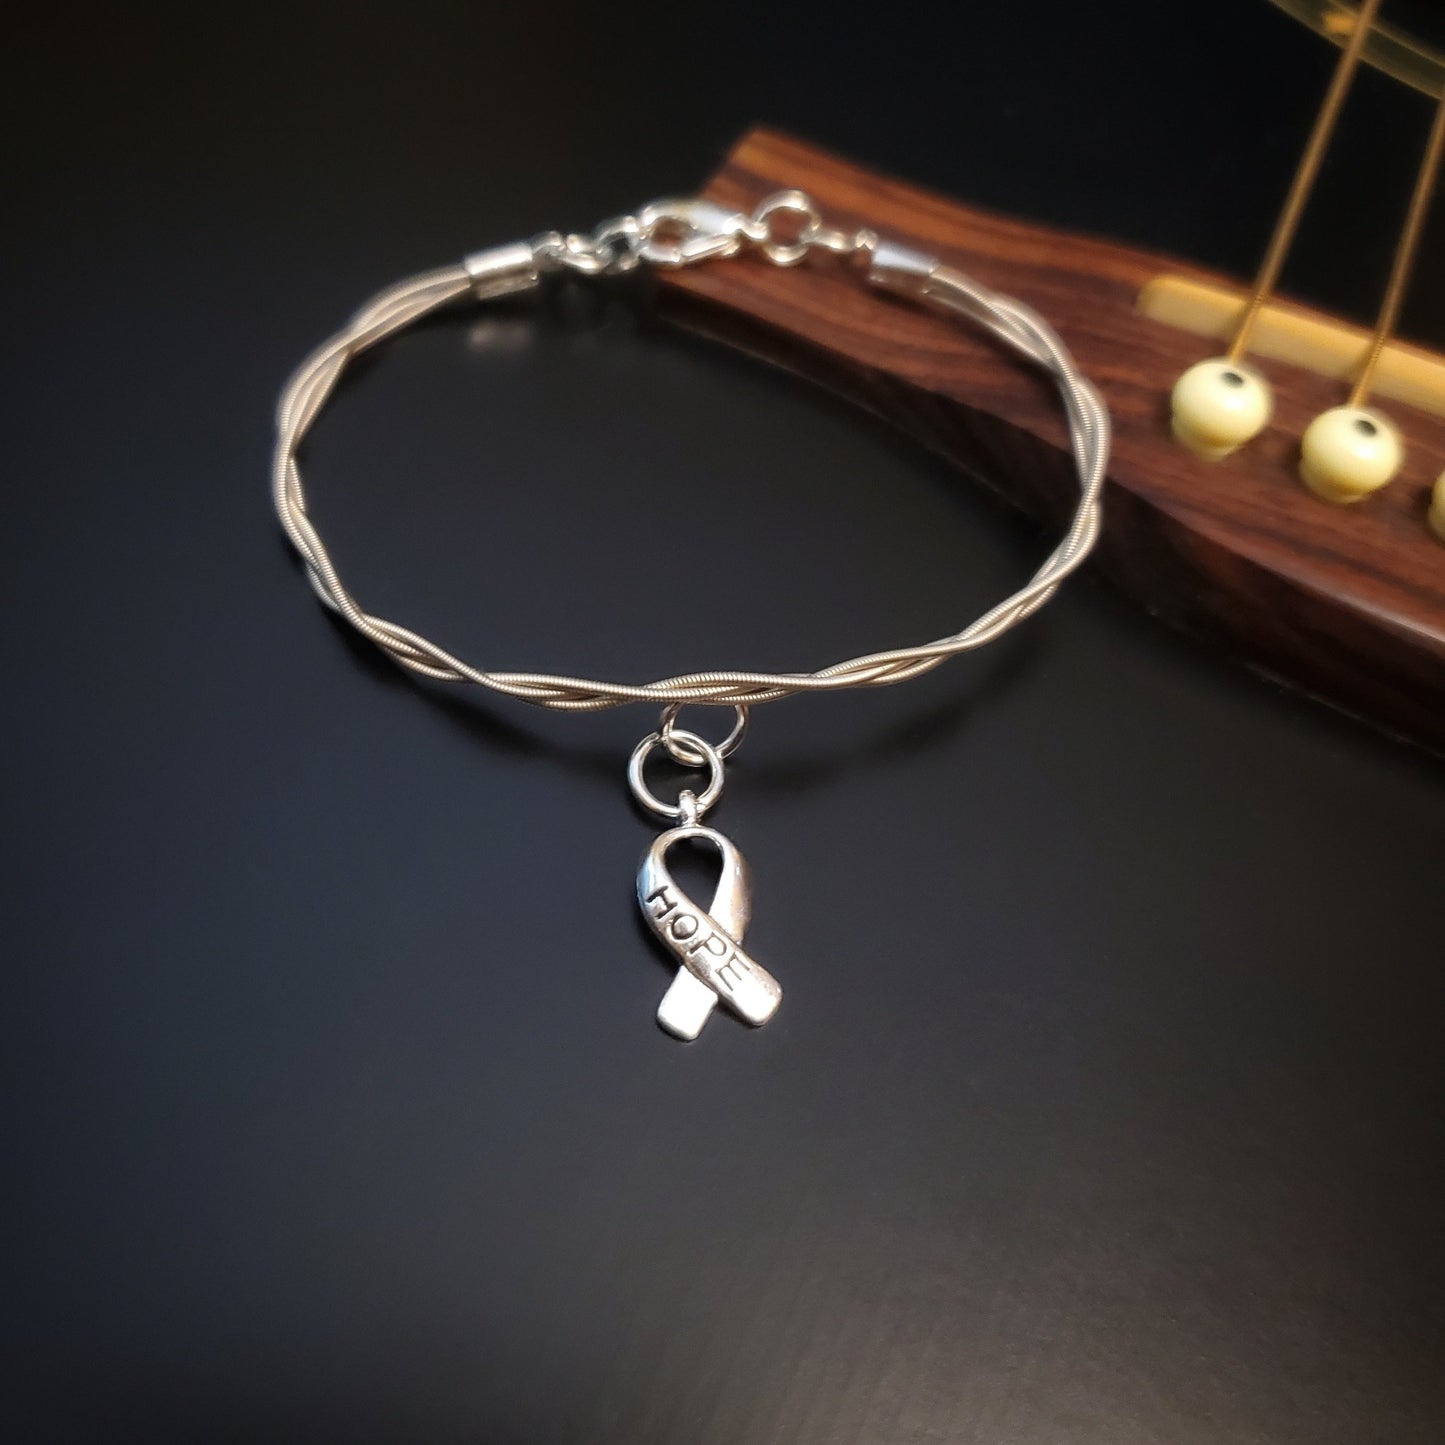 braided guitar string clasp style bracelet with ribbon style charm the word "HOPE" is engraved on the charm - the bracelet is lying on the bridge of a black guitar